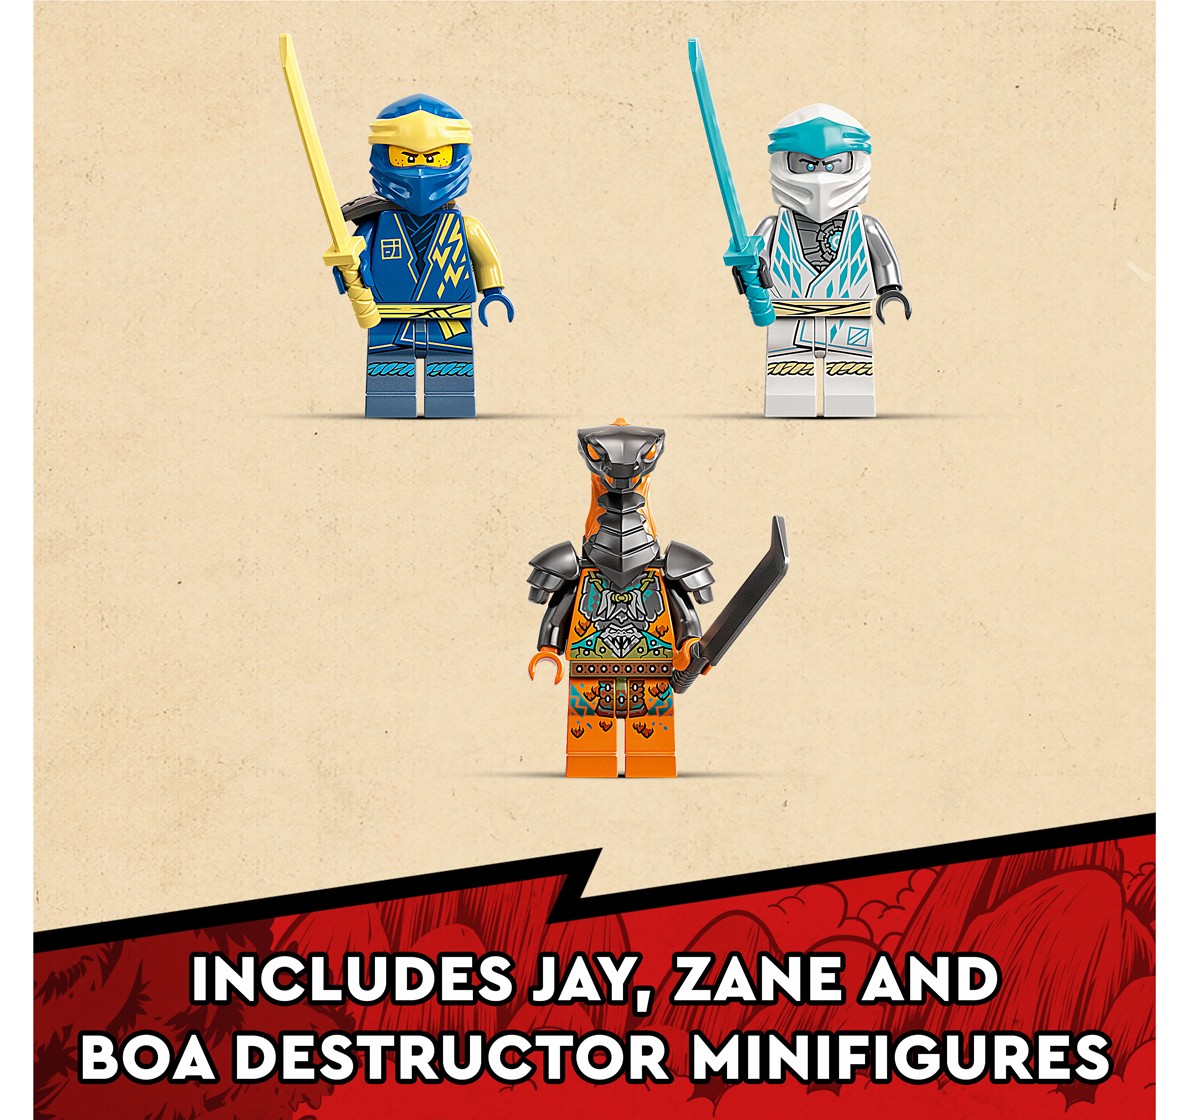 Lego NINJAGO Ninja Training Center Building Kit Featuring NINJAGO Zane and Jay, a Snake Figure and a Spinning Toy  Construction Toys for Kids Aged 7+ (524 Pieces)